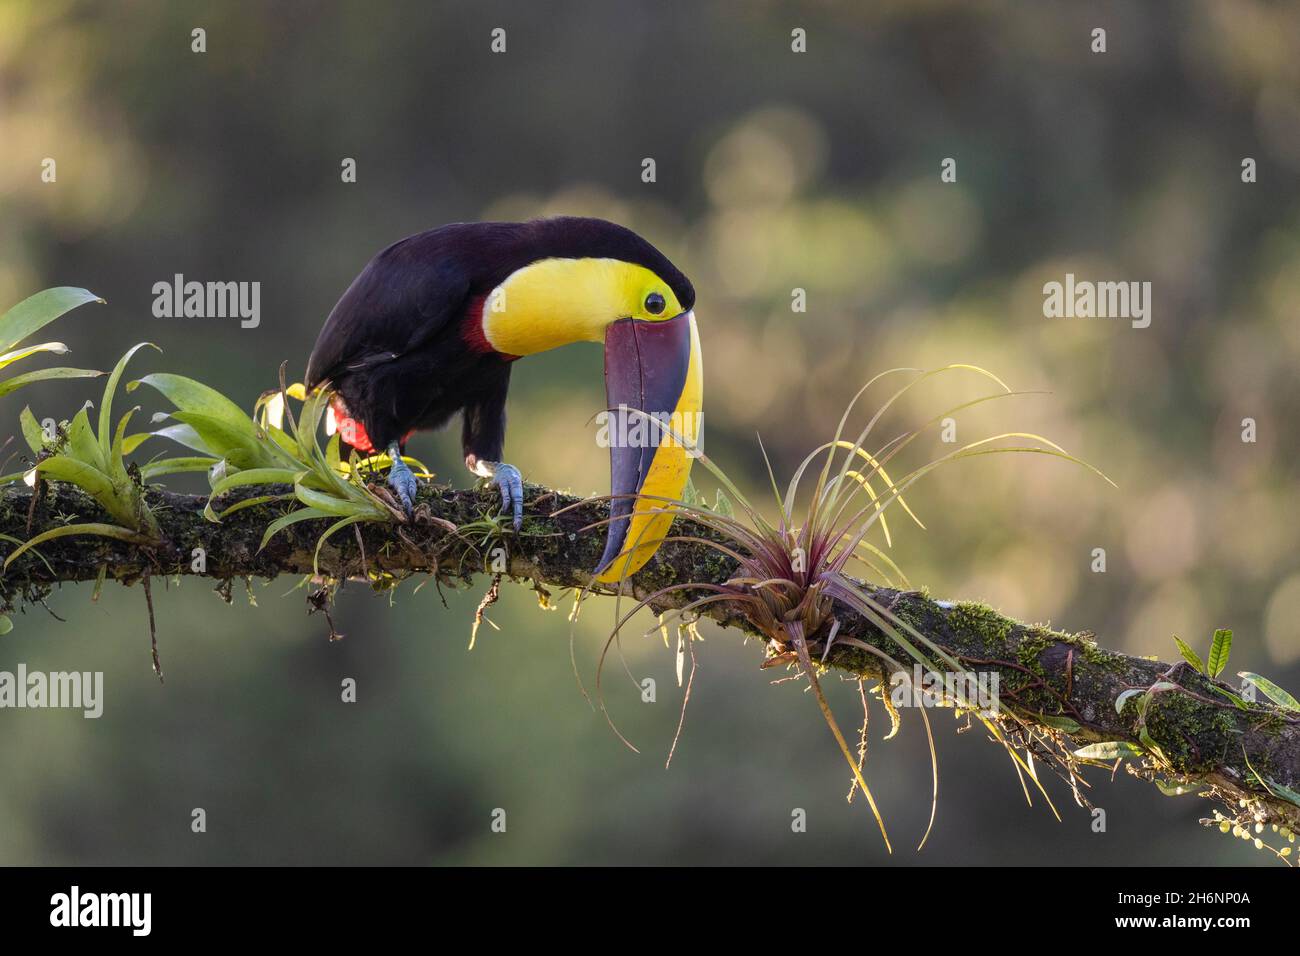 Swainson's toucan or Brown-backed toucan (Ramphastos swainsonii) on branch with bromeliads, Boca Tapada region, Costa Rica Stock Photo